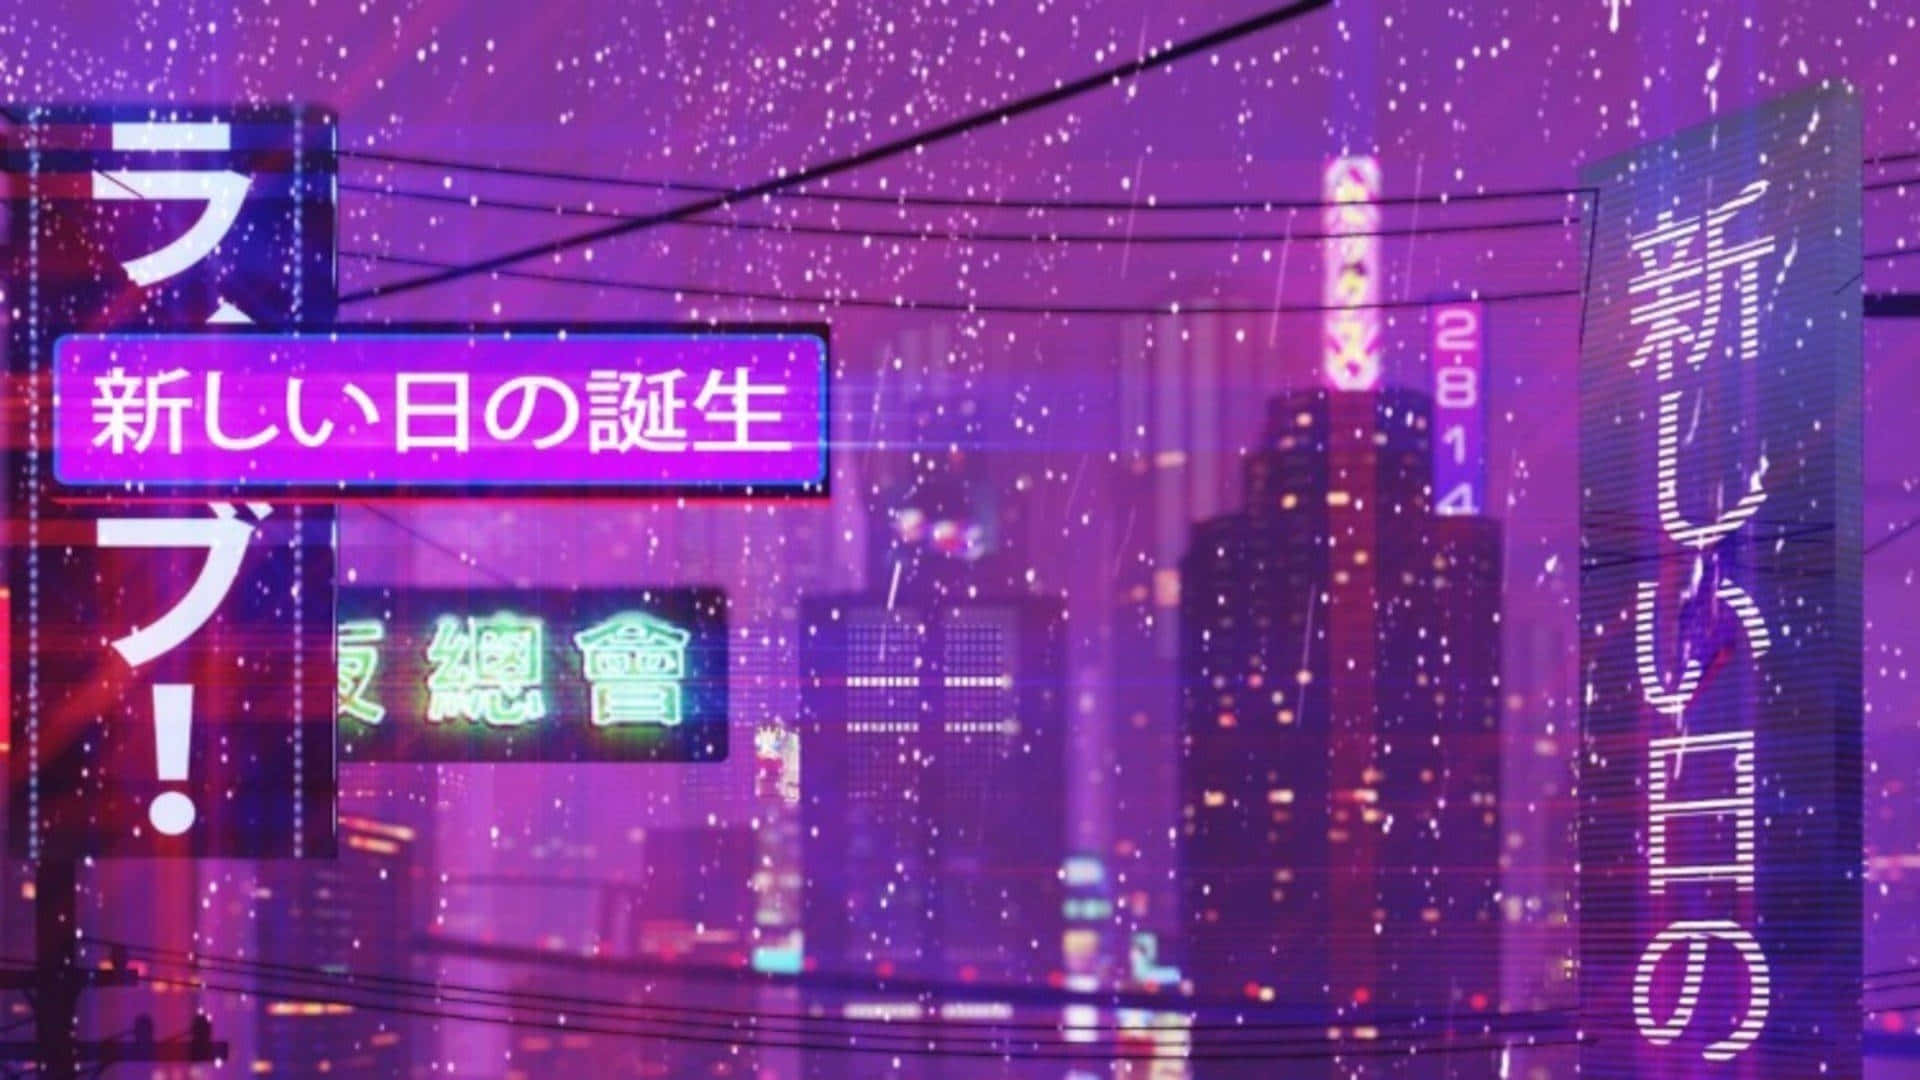 A City With Neon Lights And A Neon Sign Wallpaper